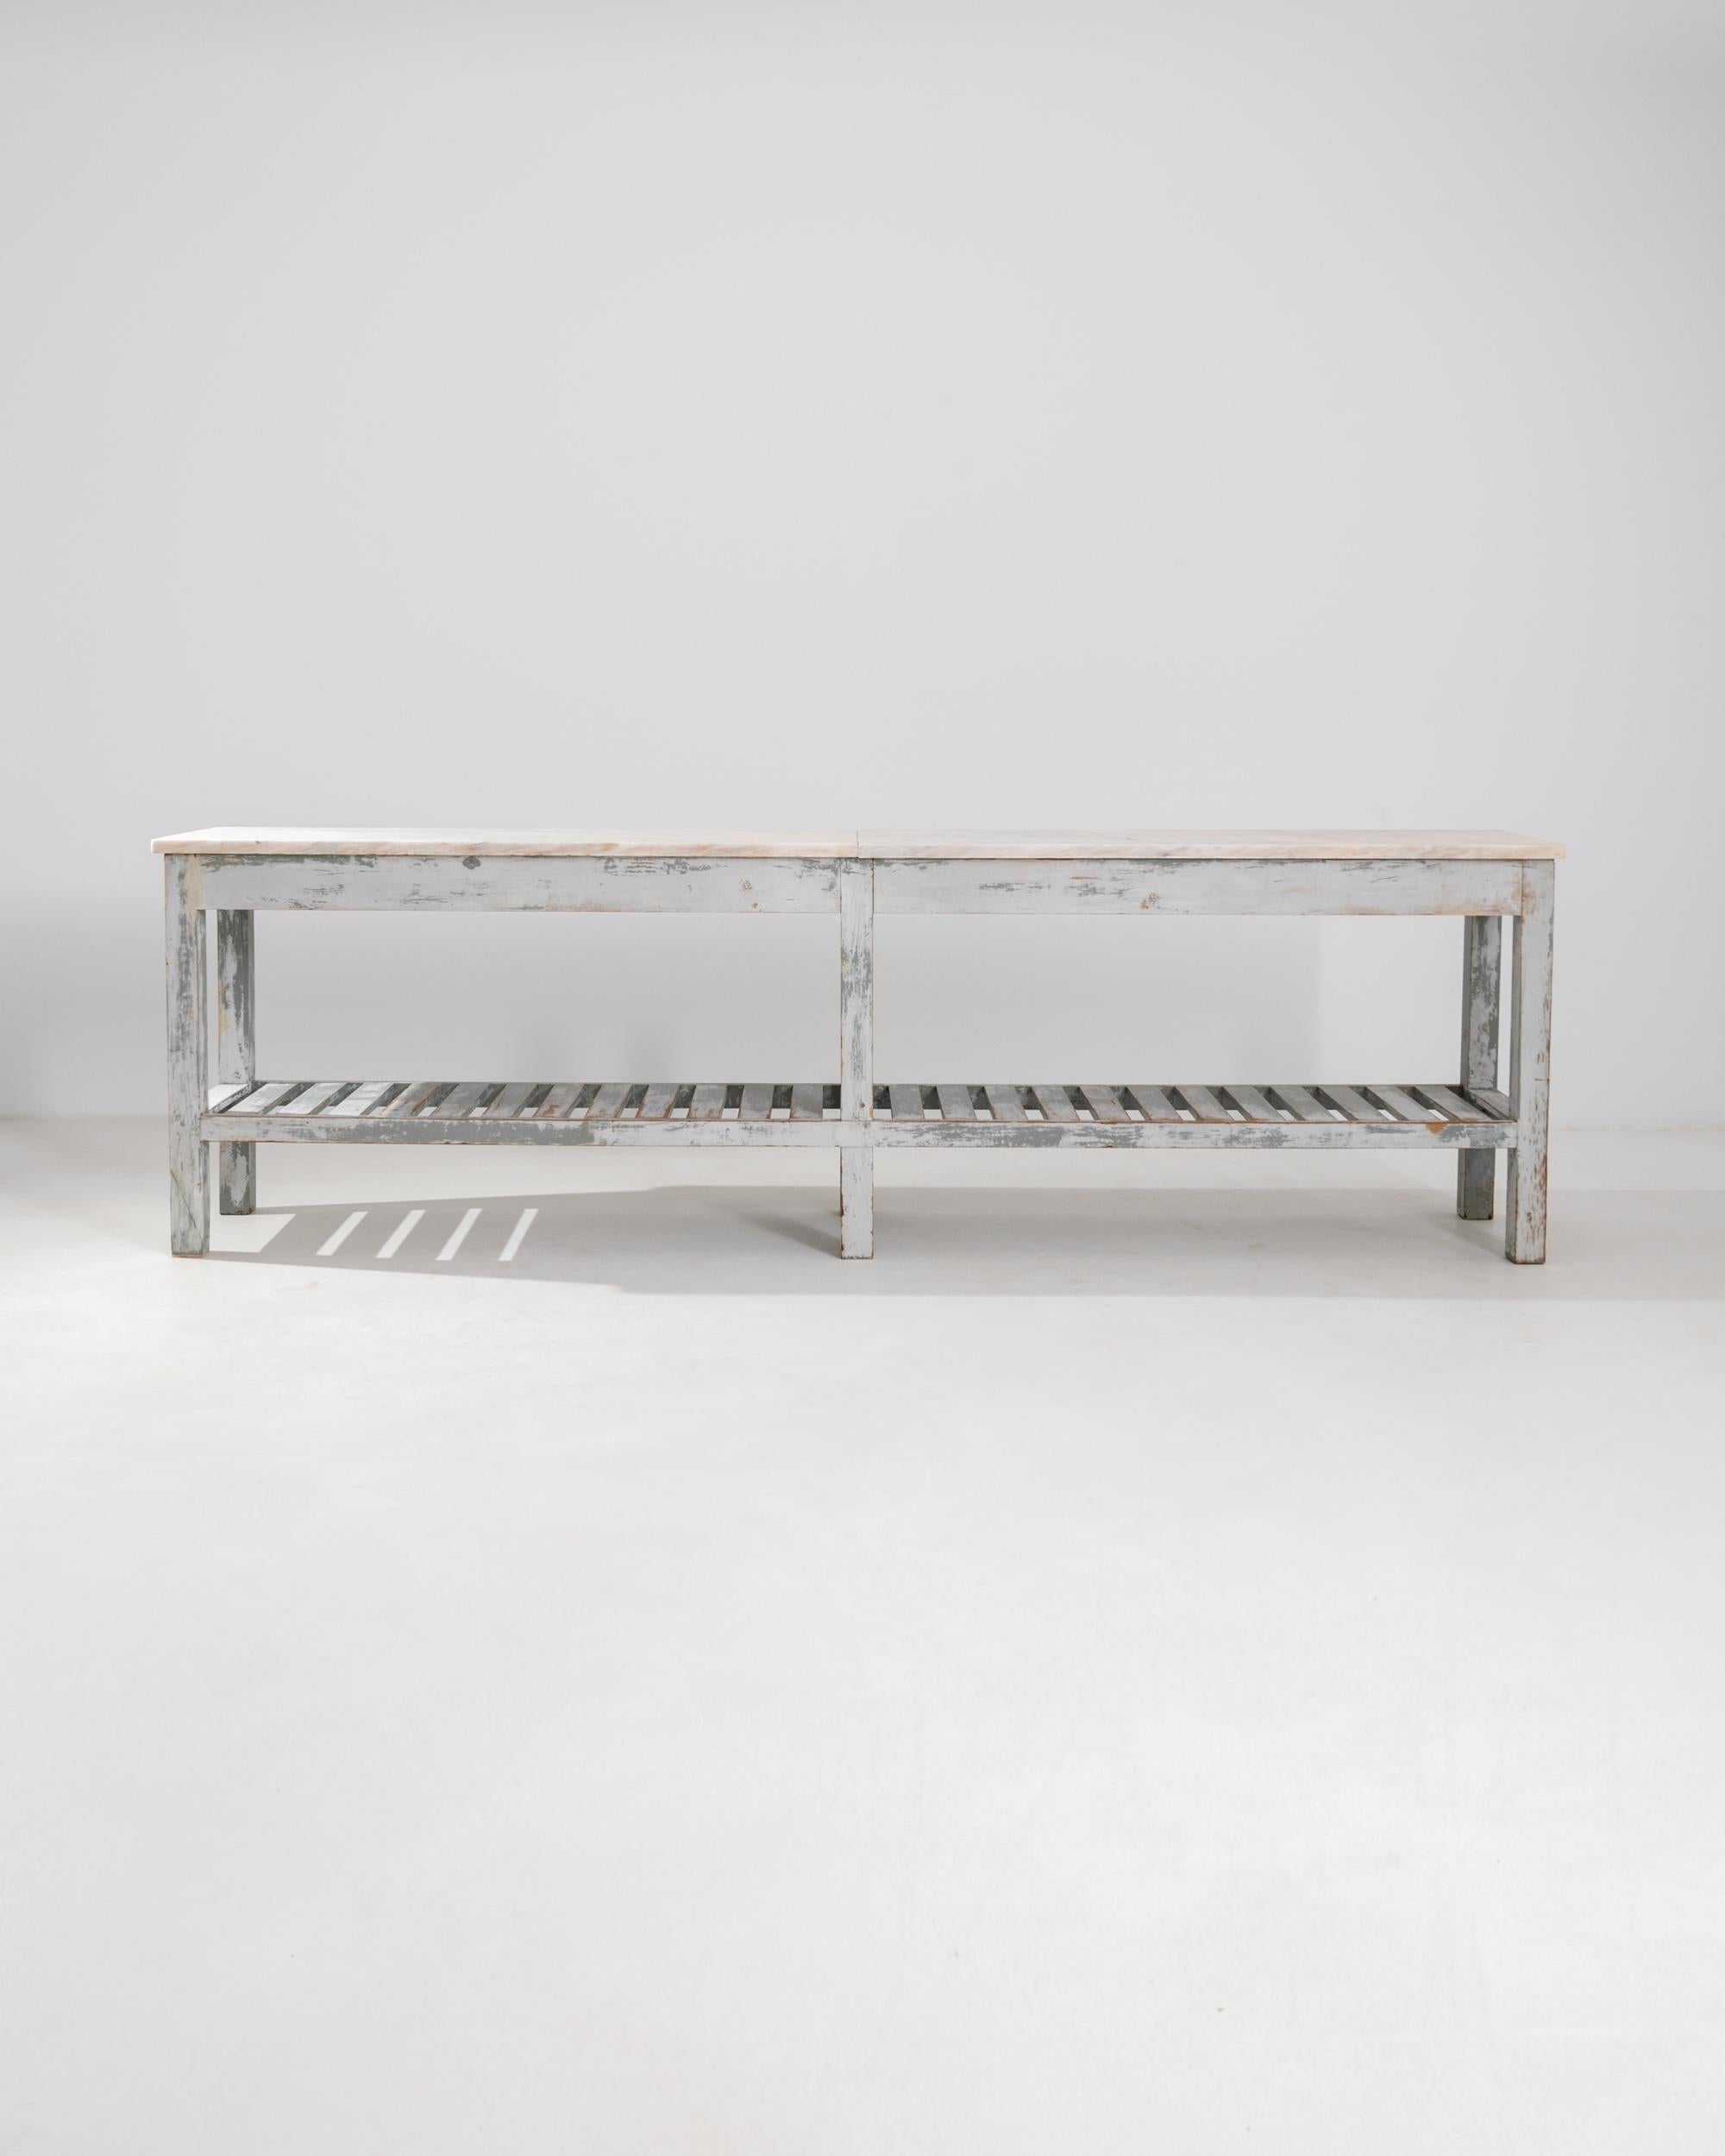 This vintage table combines a distressed patina with an elegant marble tabletop for a unique synthesis of simplicity and refinement. Made in Portugal at the turn of the century, this piece was likely originally used in a kitchen or bakery: marble